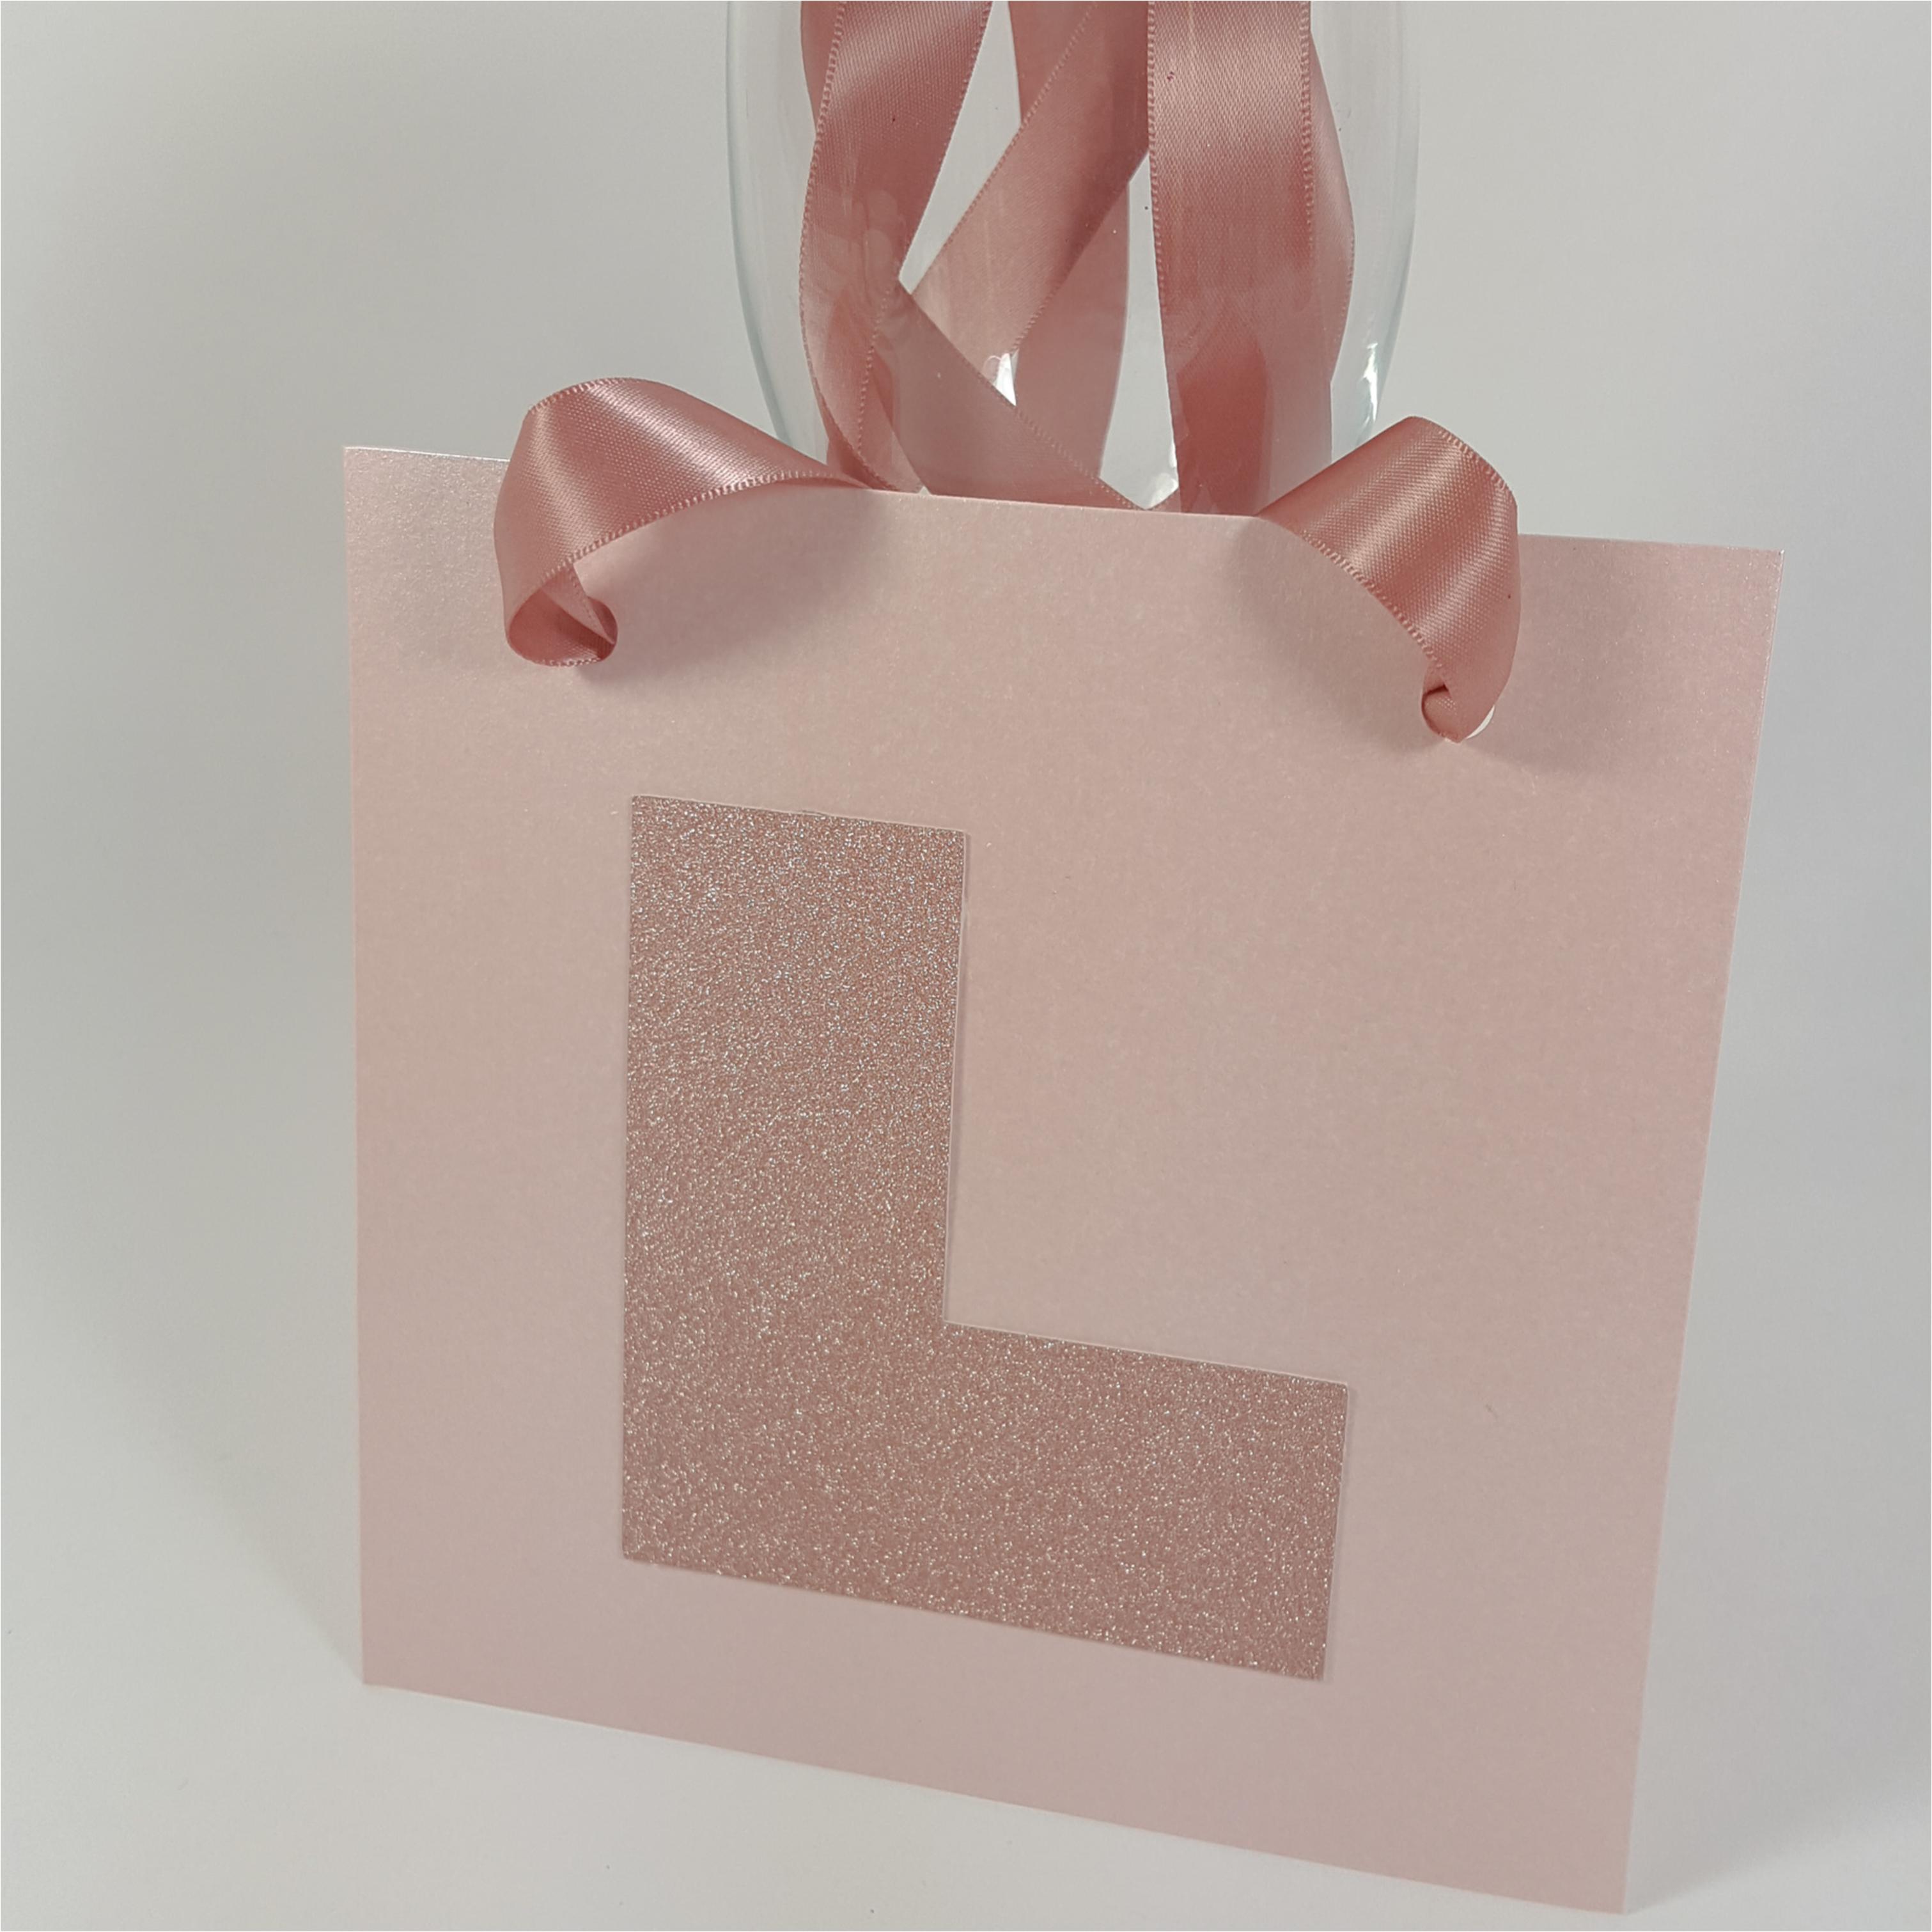 Rose gold hen party L plate with rose gold glitter